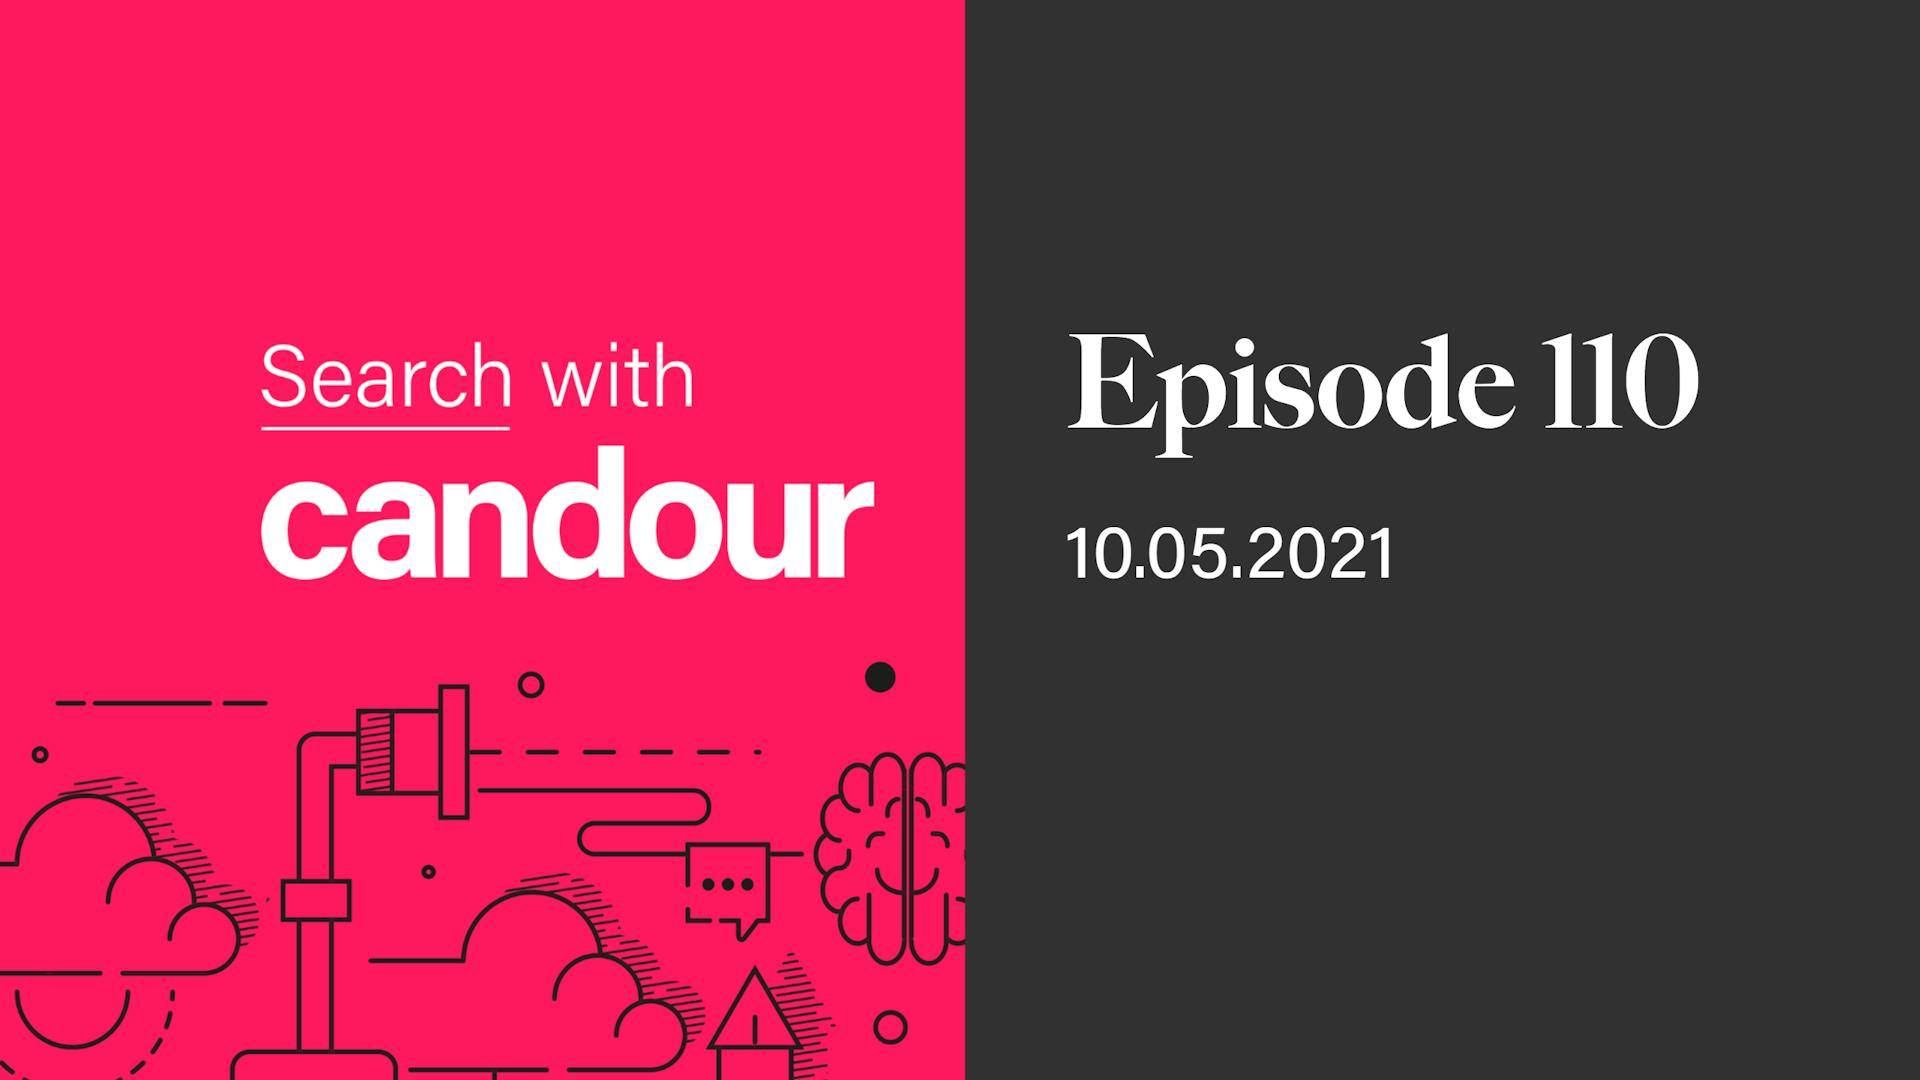 Episode 110 - Search with Candour